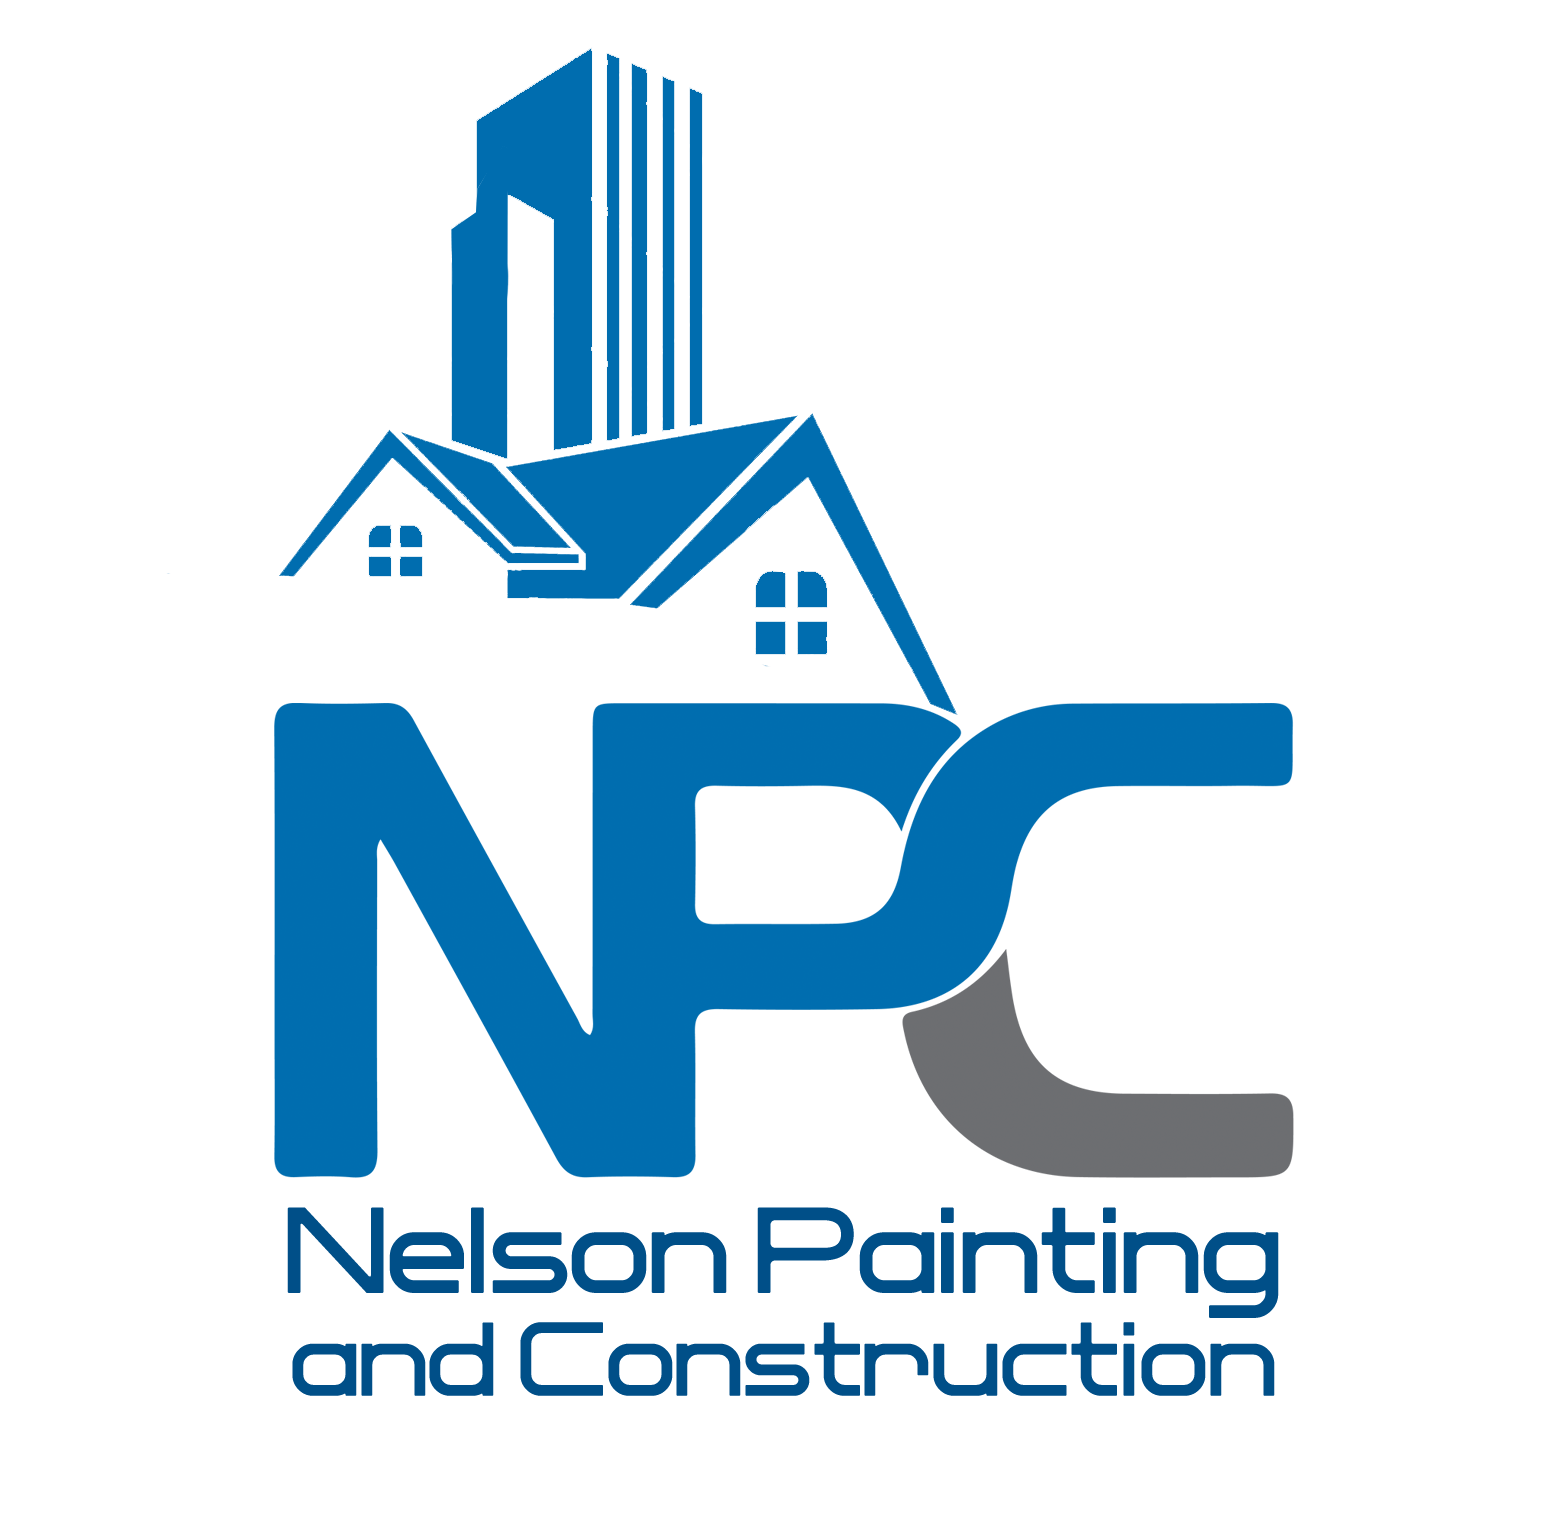 Nelson Painting & Construction